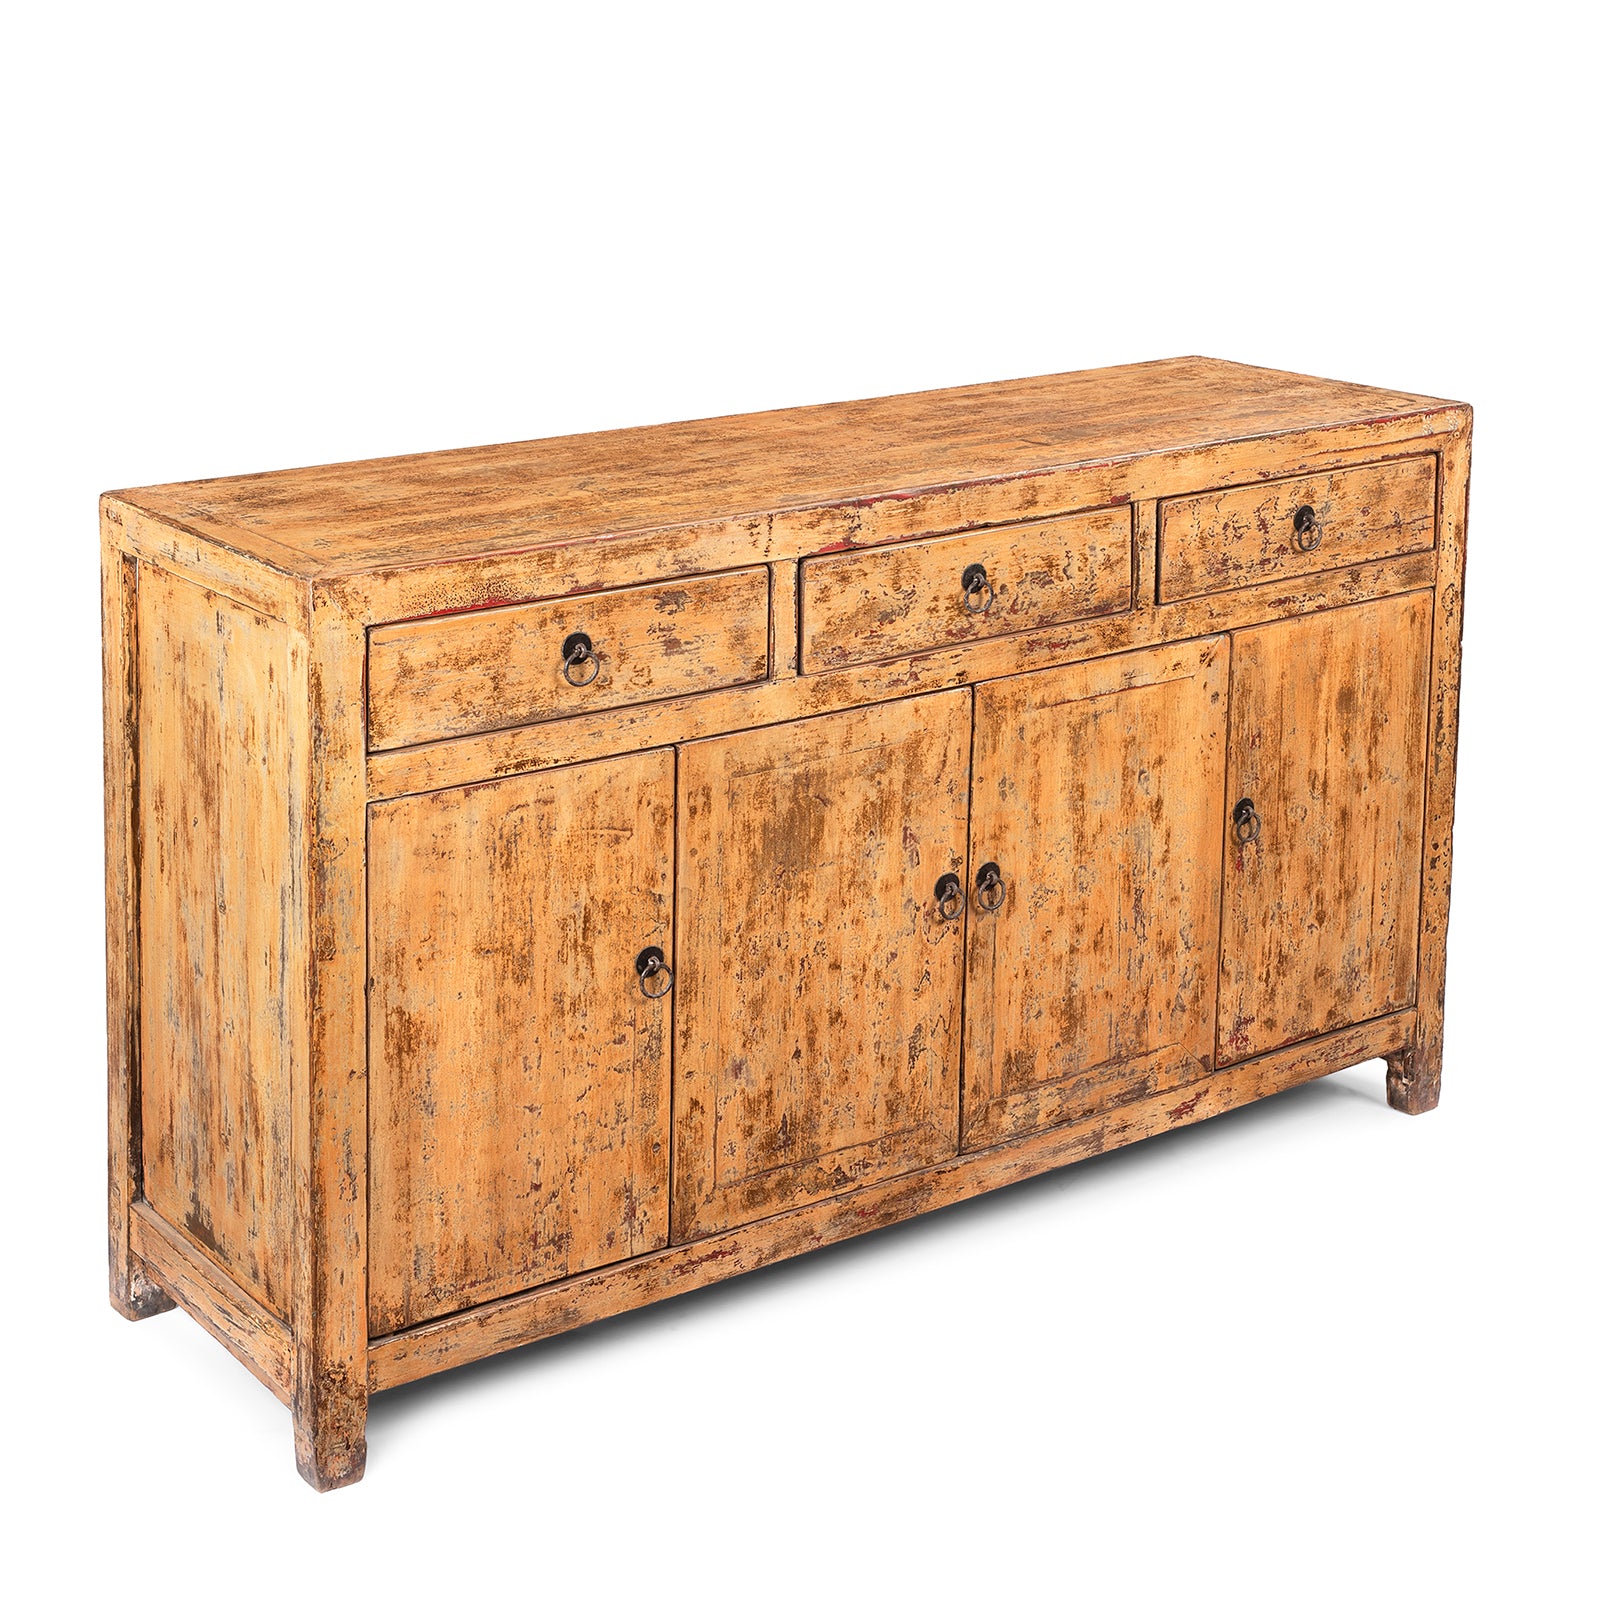 Chinese Yellow Lacquer Sideboard Made From Reclaimed Wood | Indigo Antiques